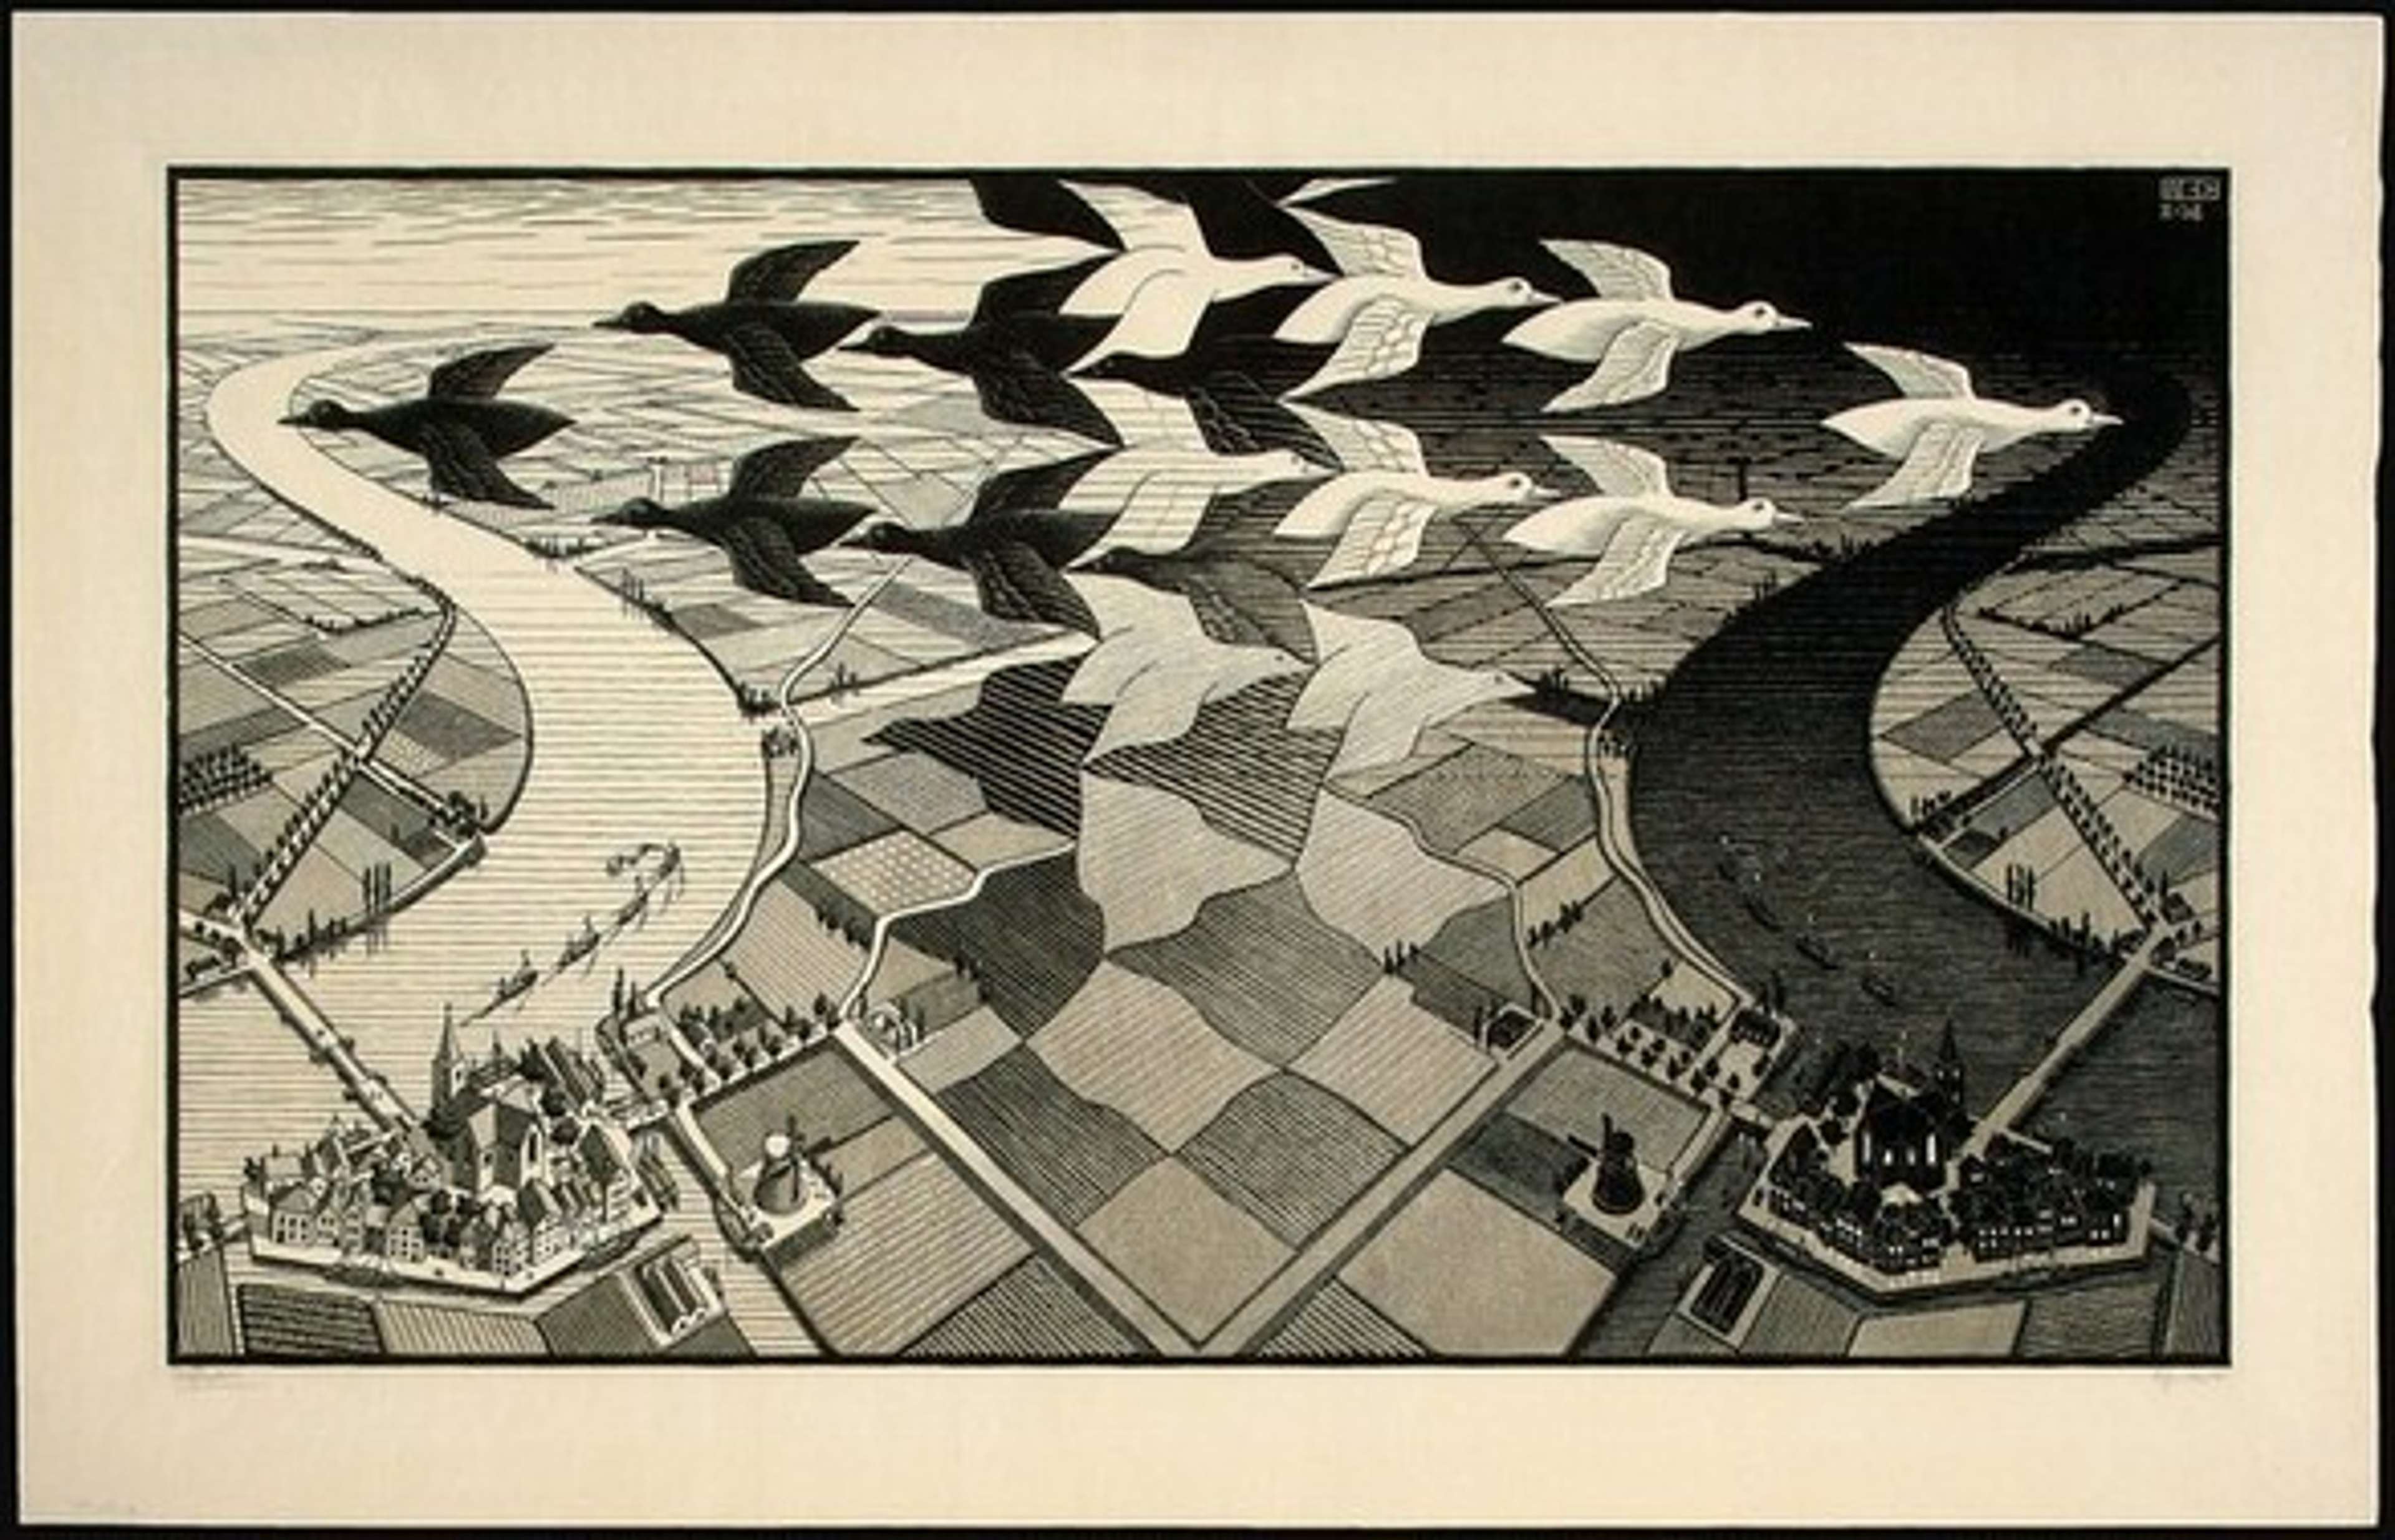 A black and white woodcut print titled "Day and Night" by M.C. Escher, featuring two landscapes in contrasting scenes and a tessellated pattern of black and white birds in the foreground.